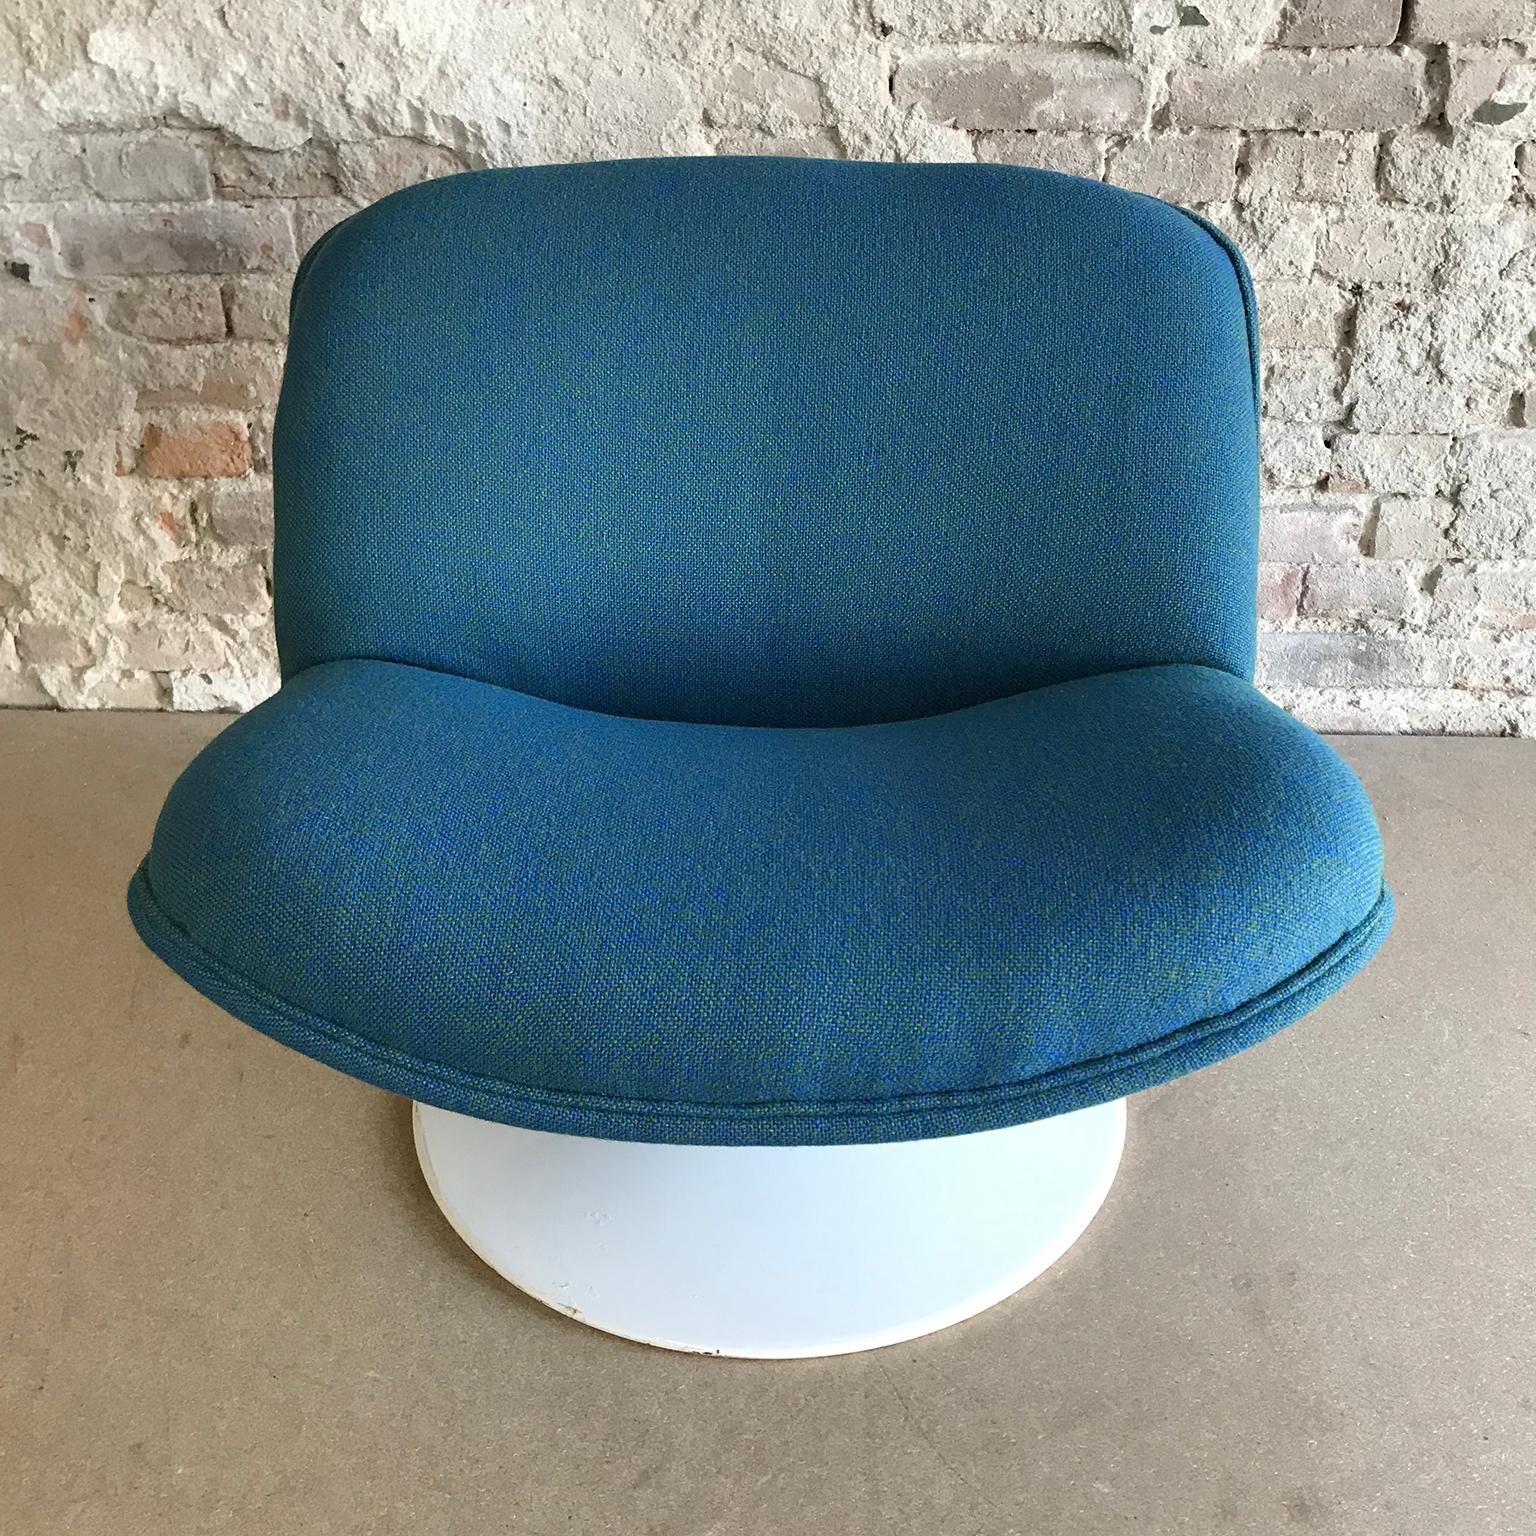 1977, Geoffrey Harcourt, Artifort 508 Chair by New Upholstery Blue Green Fabric 1